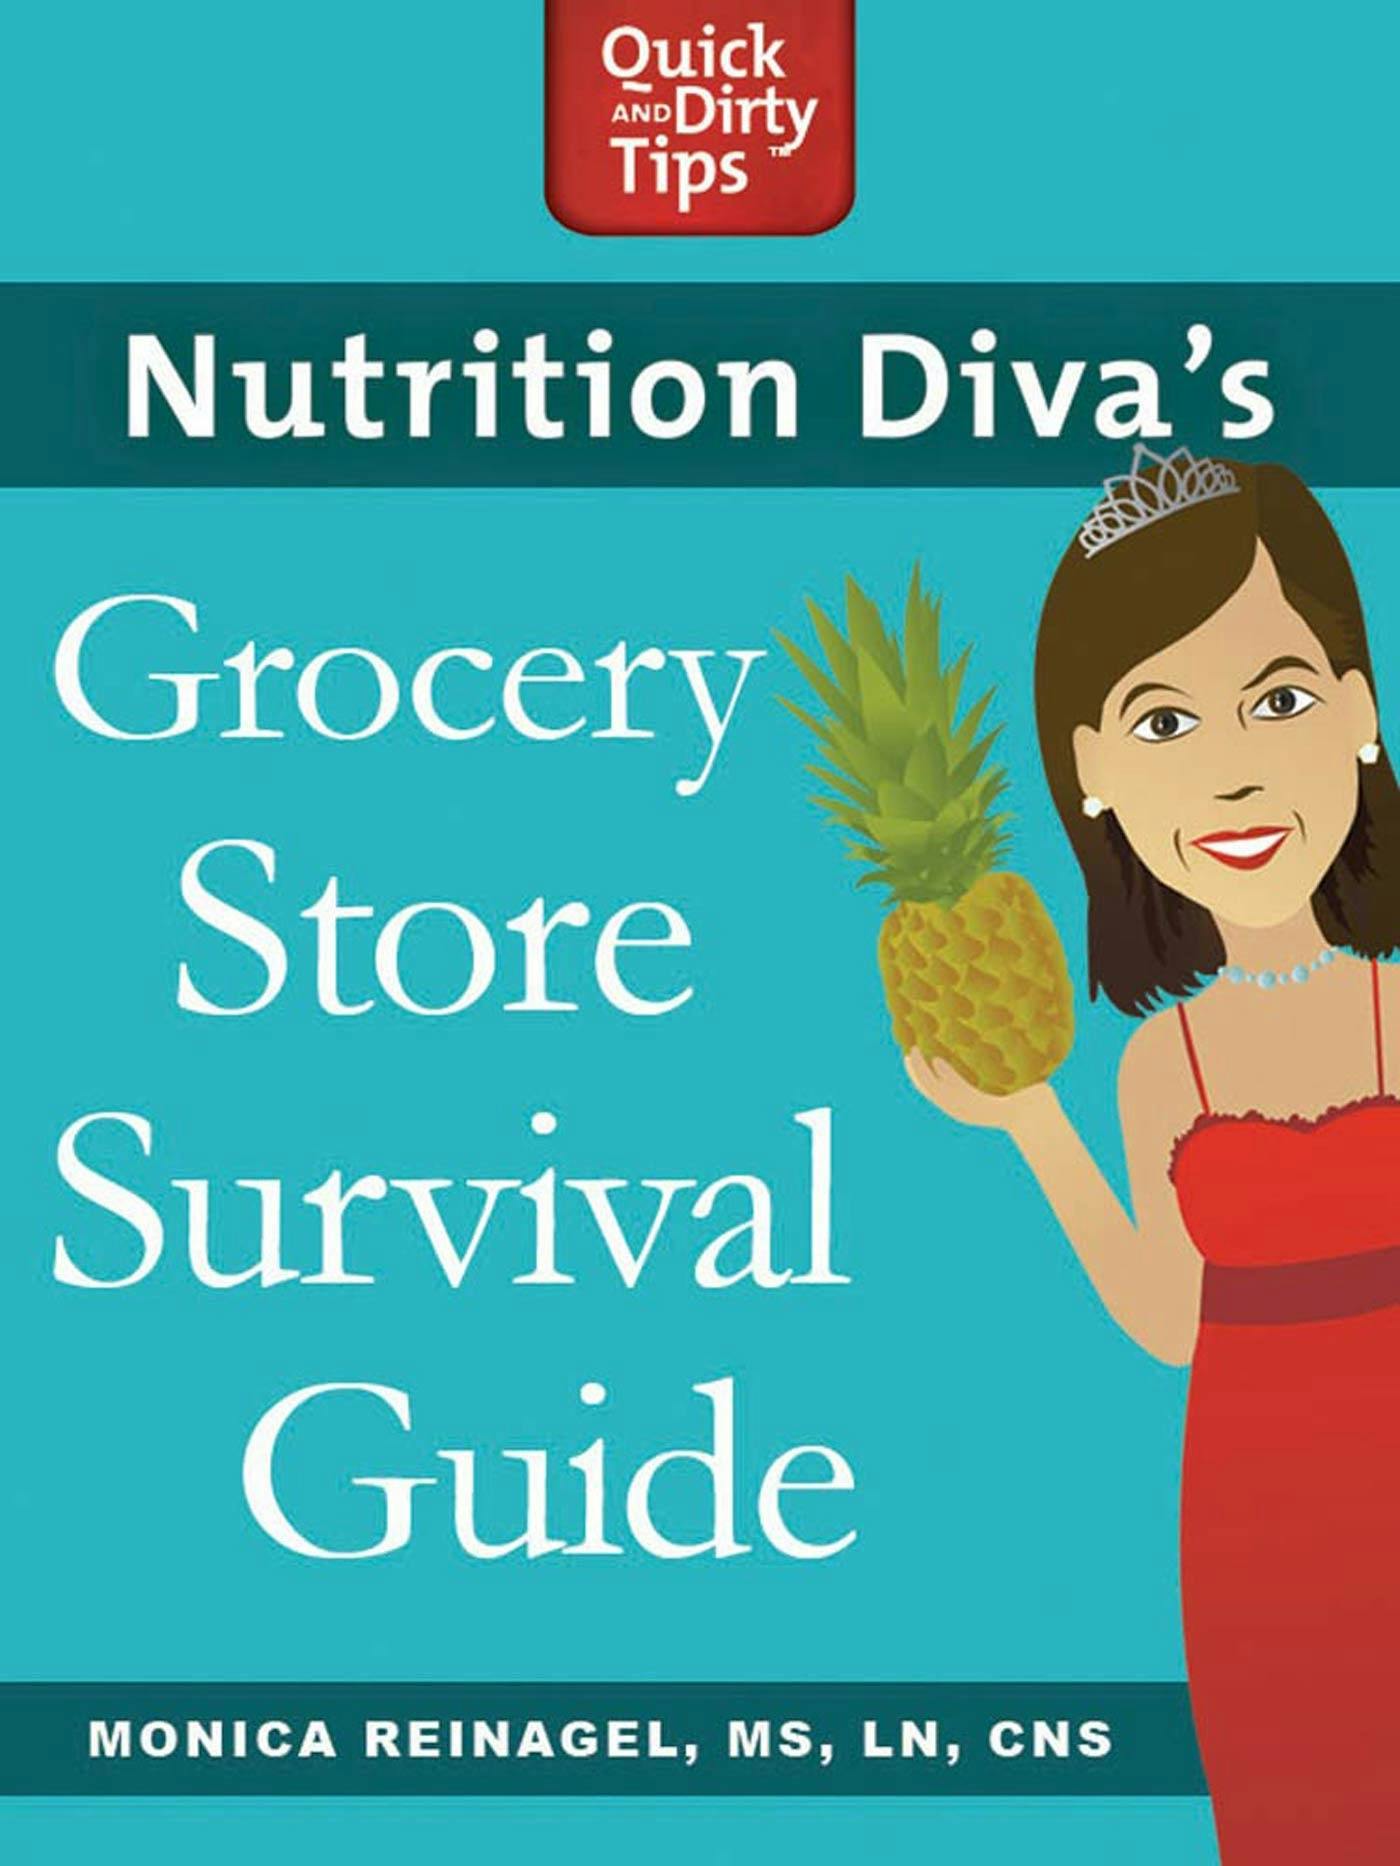 Nutrition Diva's Grocery Store Survival Guide